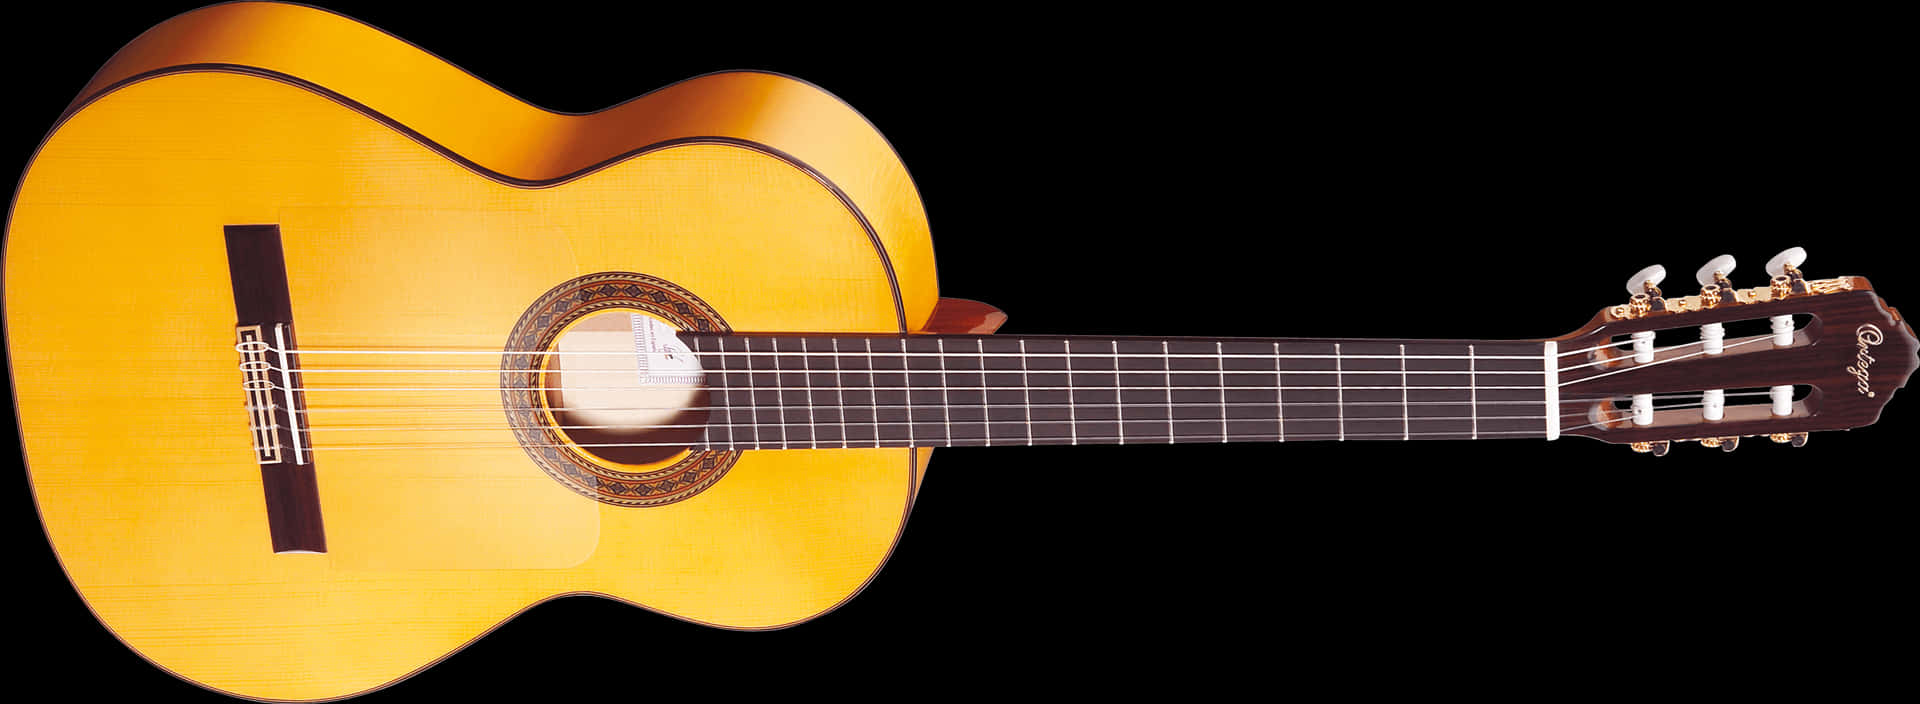 Classic Acoustic Guitar Isolatedon Black PNG